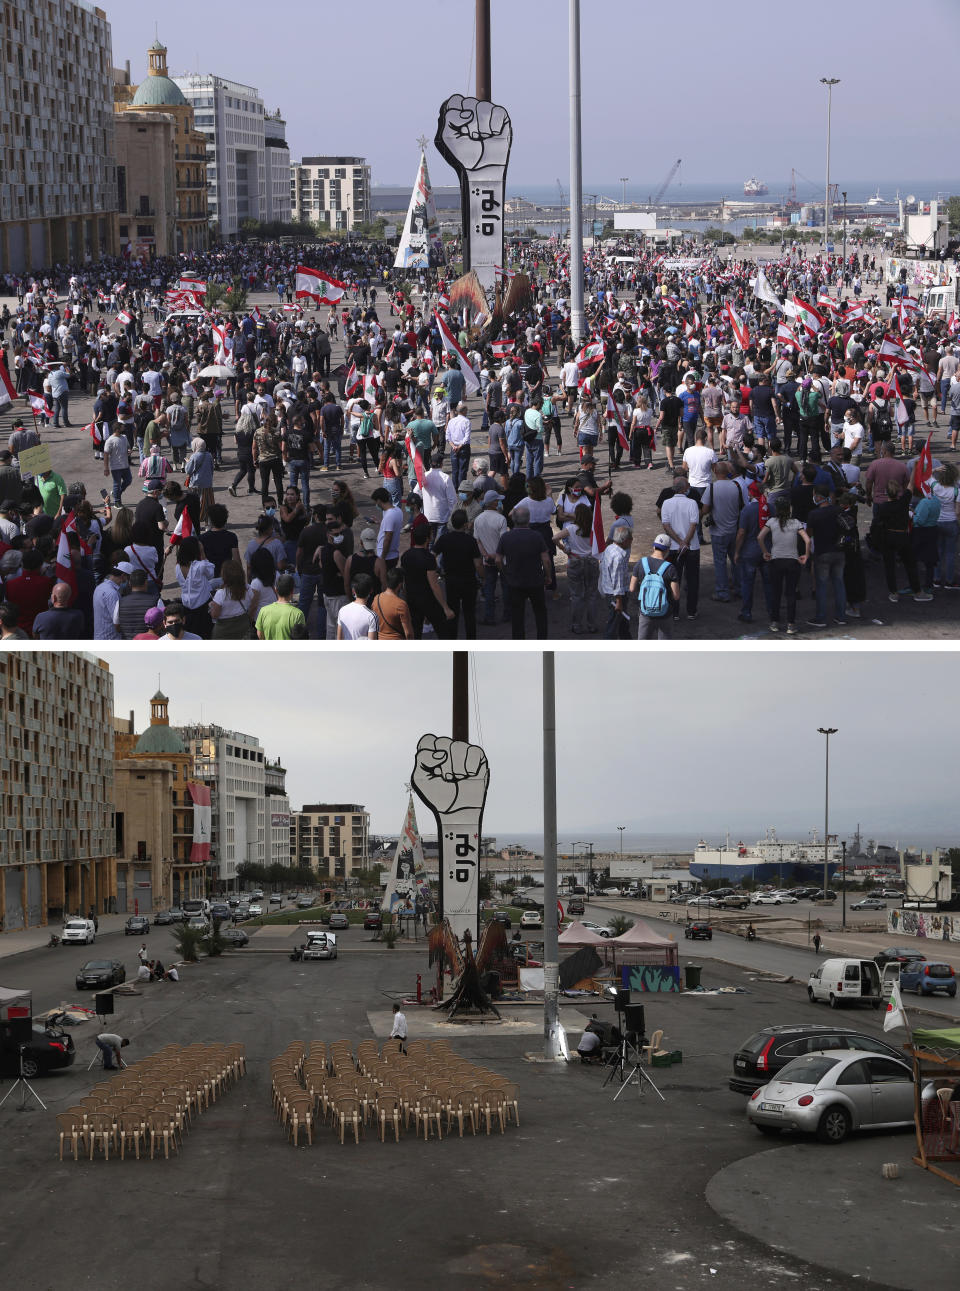 In this two photo combination picture, top photo shows anti-government protesters gather around fist with an Arabic word that reads "Revolution," at Martyrs Square during ongoing protests against the Lebanese government, in downtown Beirut, Lebanon, Saturday, June 6, 2020, and bottom photo shows anti-government protesters stand next to fist with an Arabic word that reads "Revolution," at Martyrs Square, in downtown Beirut, Lebanon, Monday, Oct. 12, 2020. A year ago, hundreds of thousands of Lebanese took to the streets in protests nationwide that raised hopes among many for a change in a political elite that over that decades has run the country into the ground. A year later, the protests have petered out. (AP Photo/Bilal Hussein)